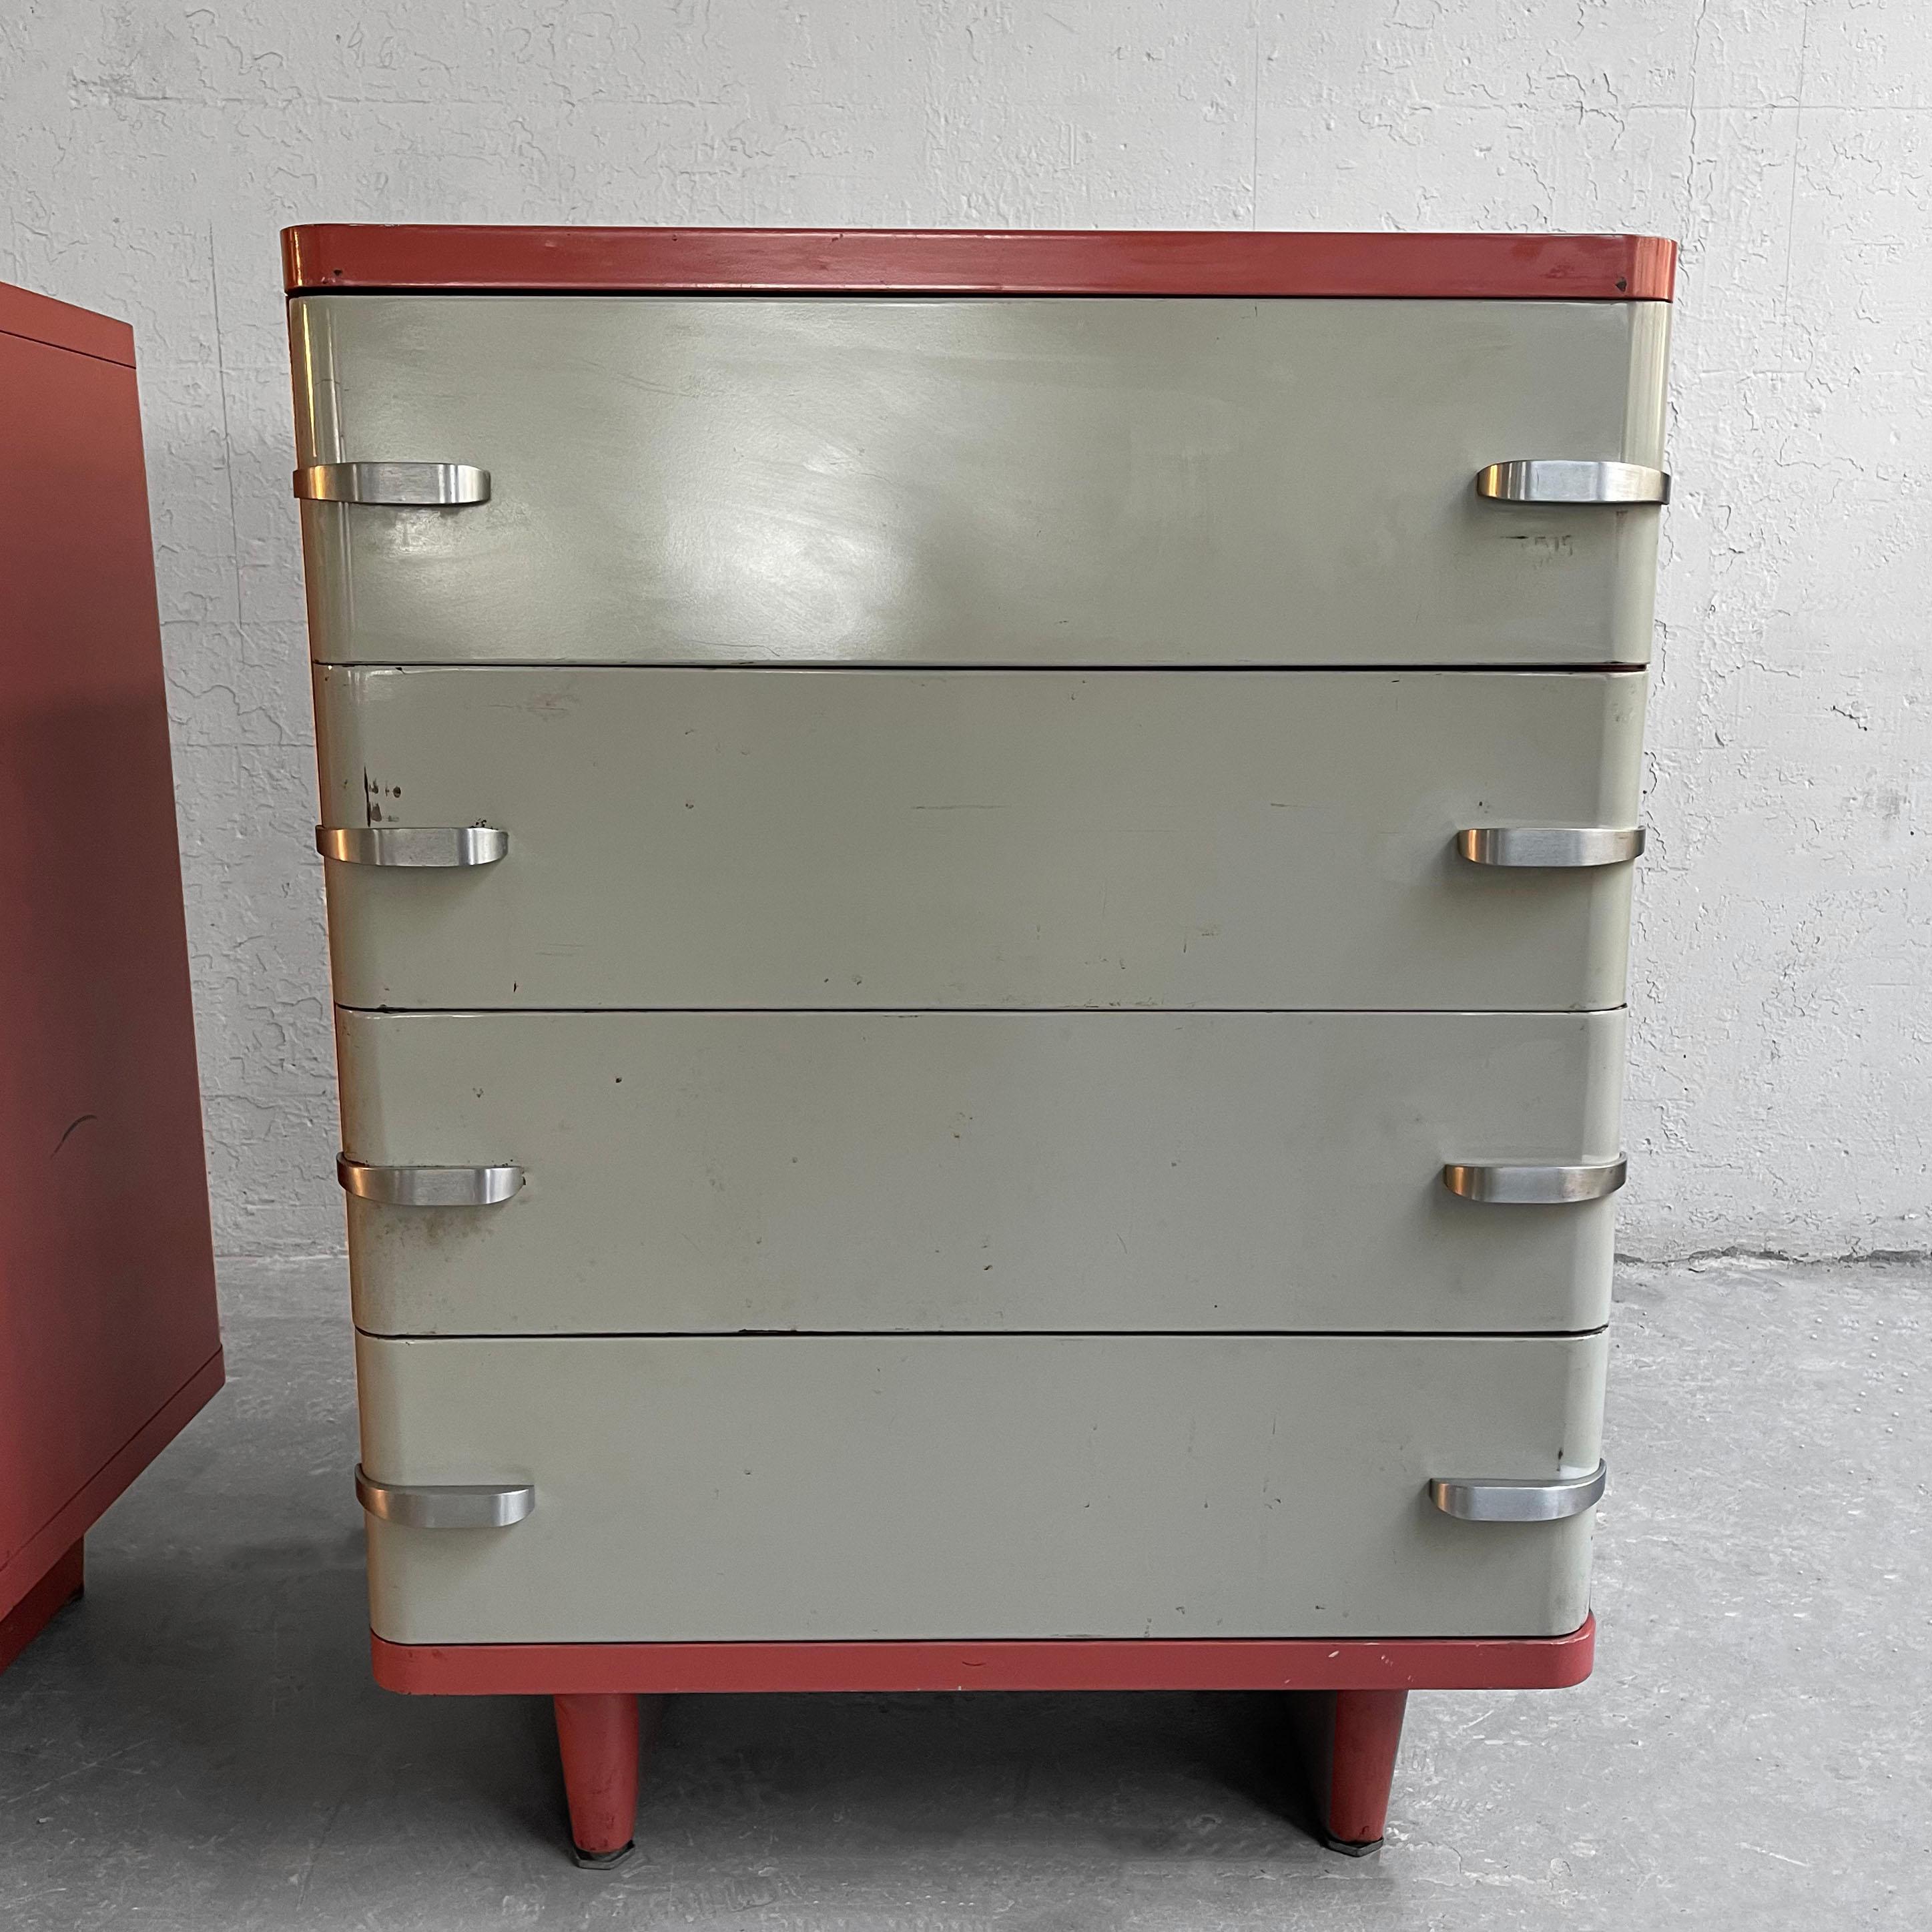 Machine-Age Painted Steel Highboy Dressers by Norman Bel Geddes For Sale 1